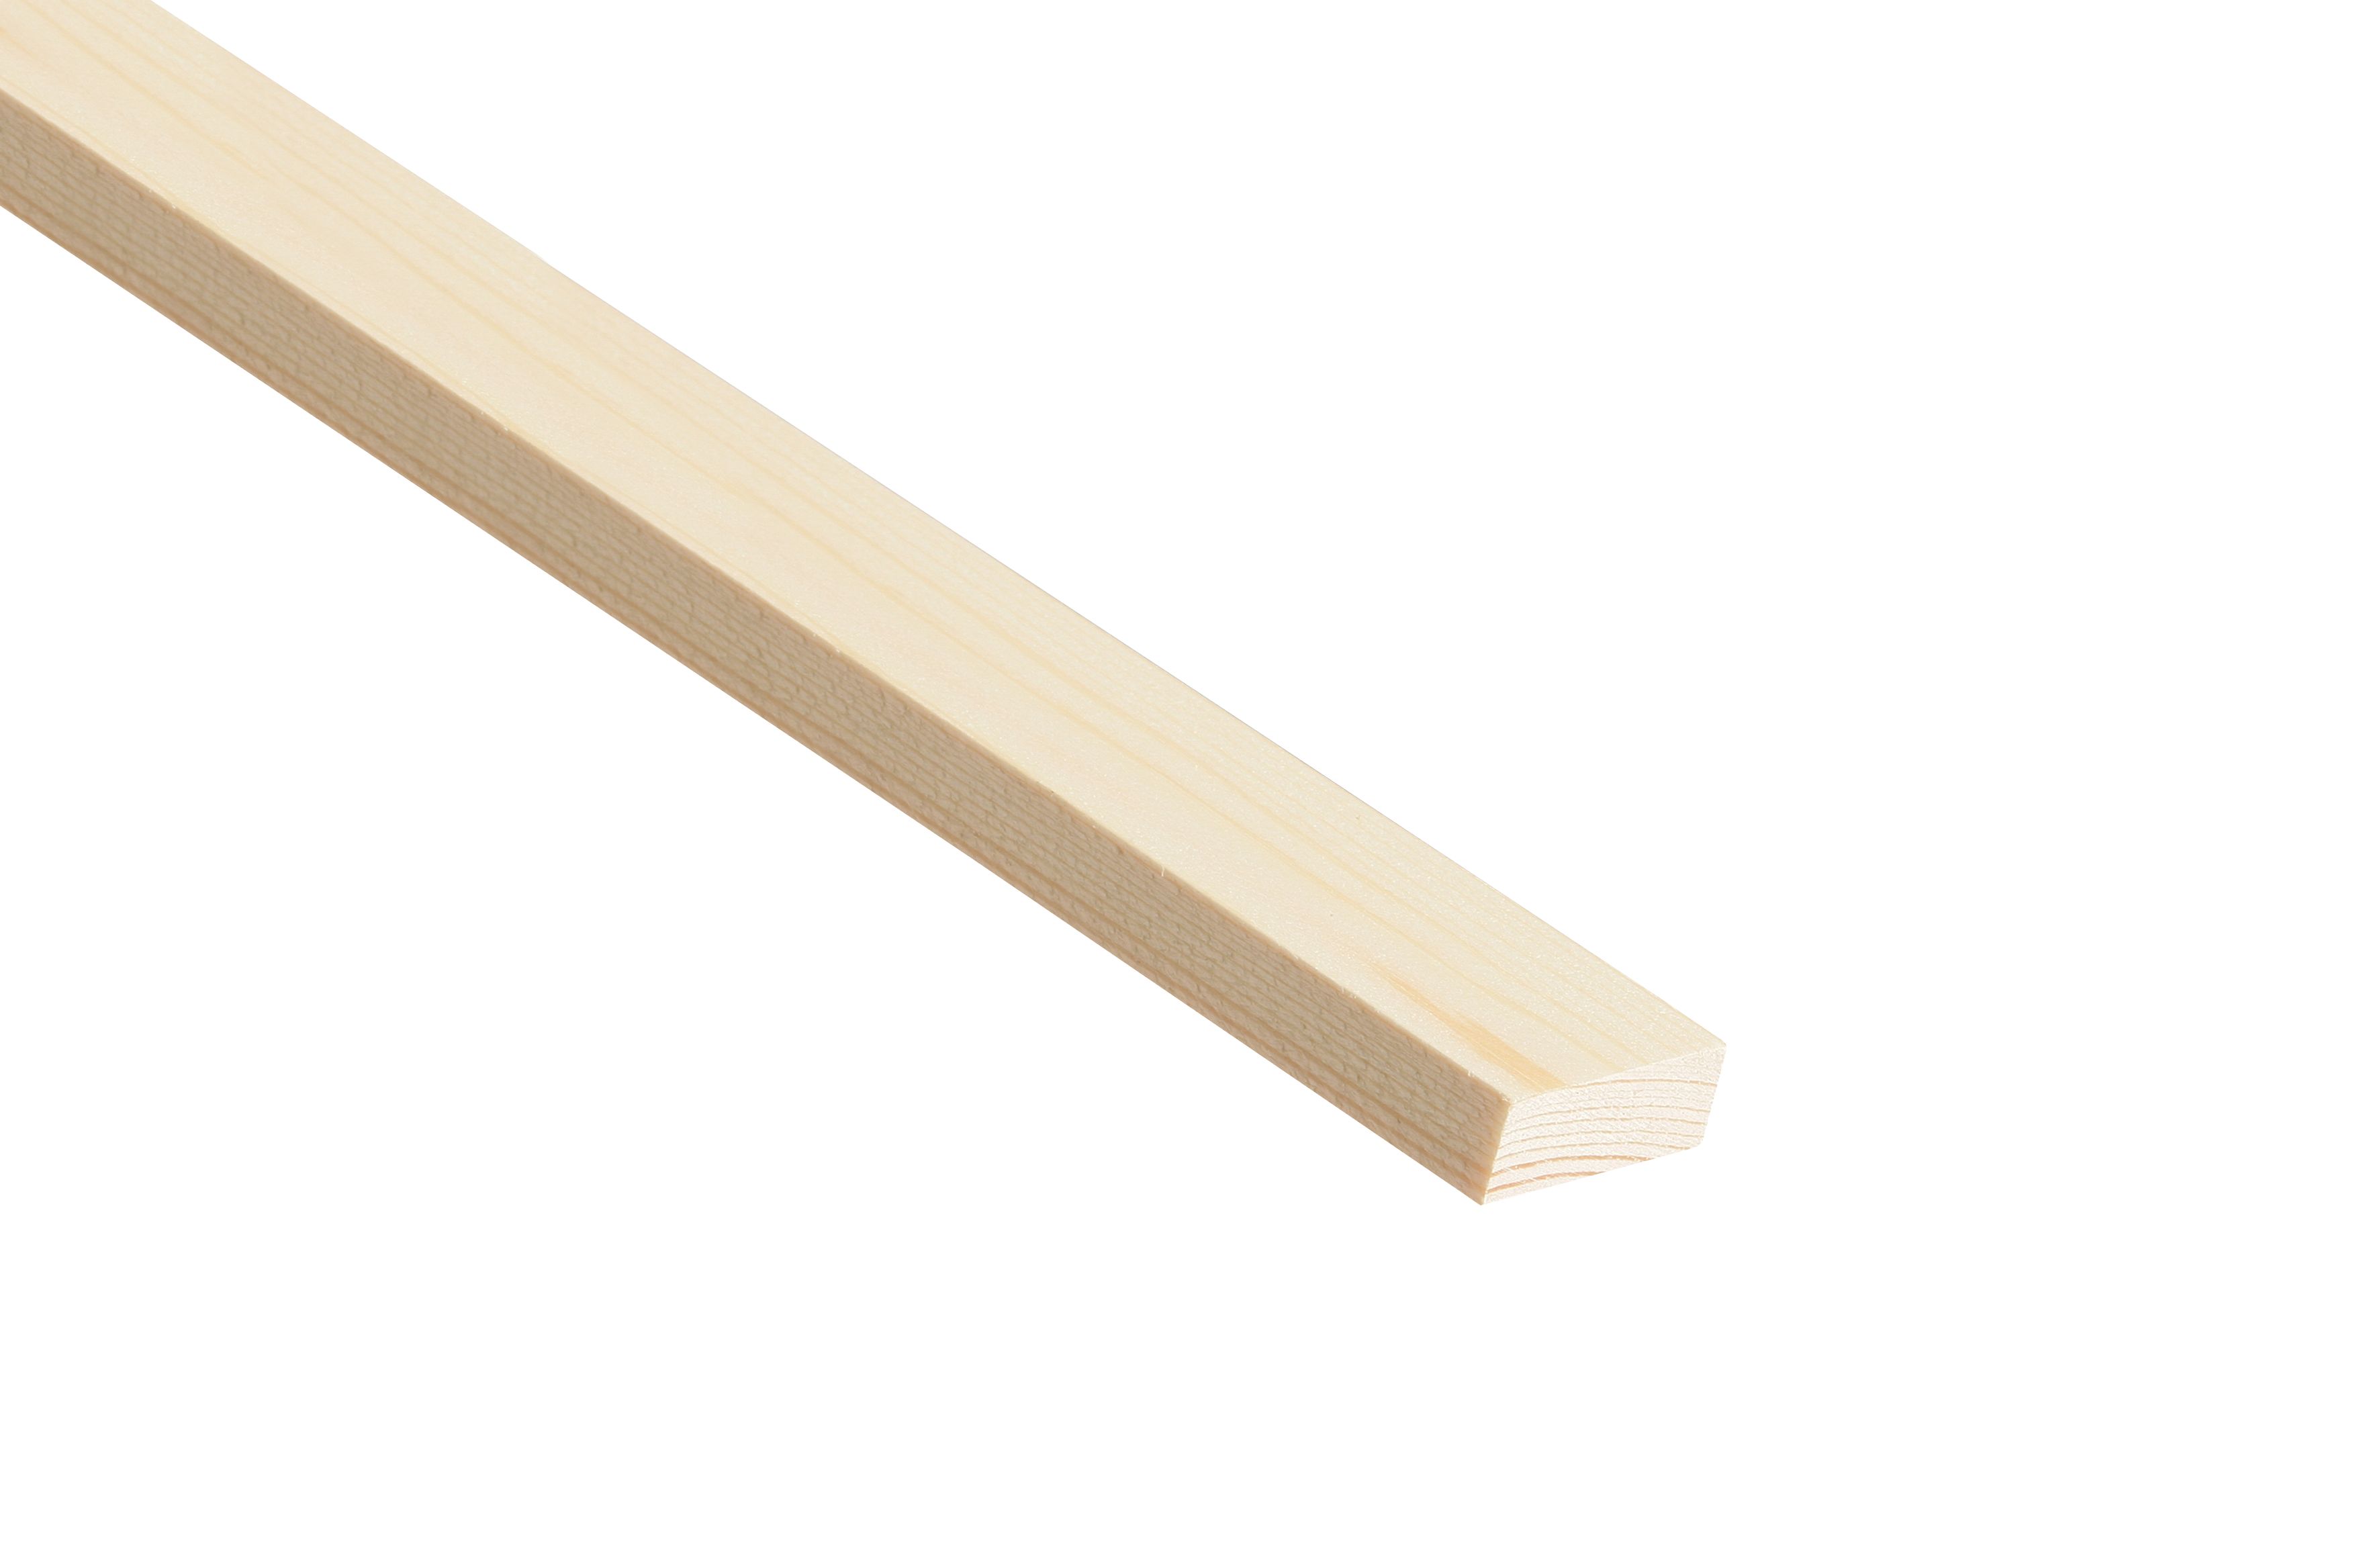 Image of Wickes Pine Stripwood Moulding (PSE) - 10 x 36 x 2400mm